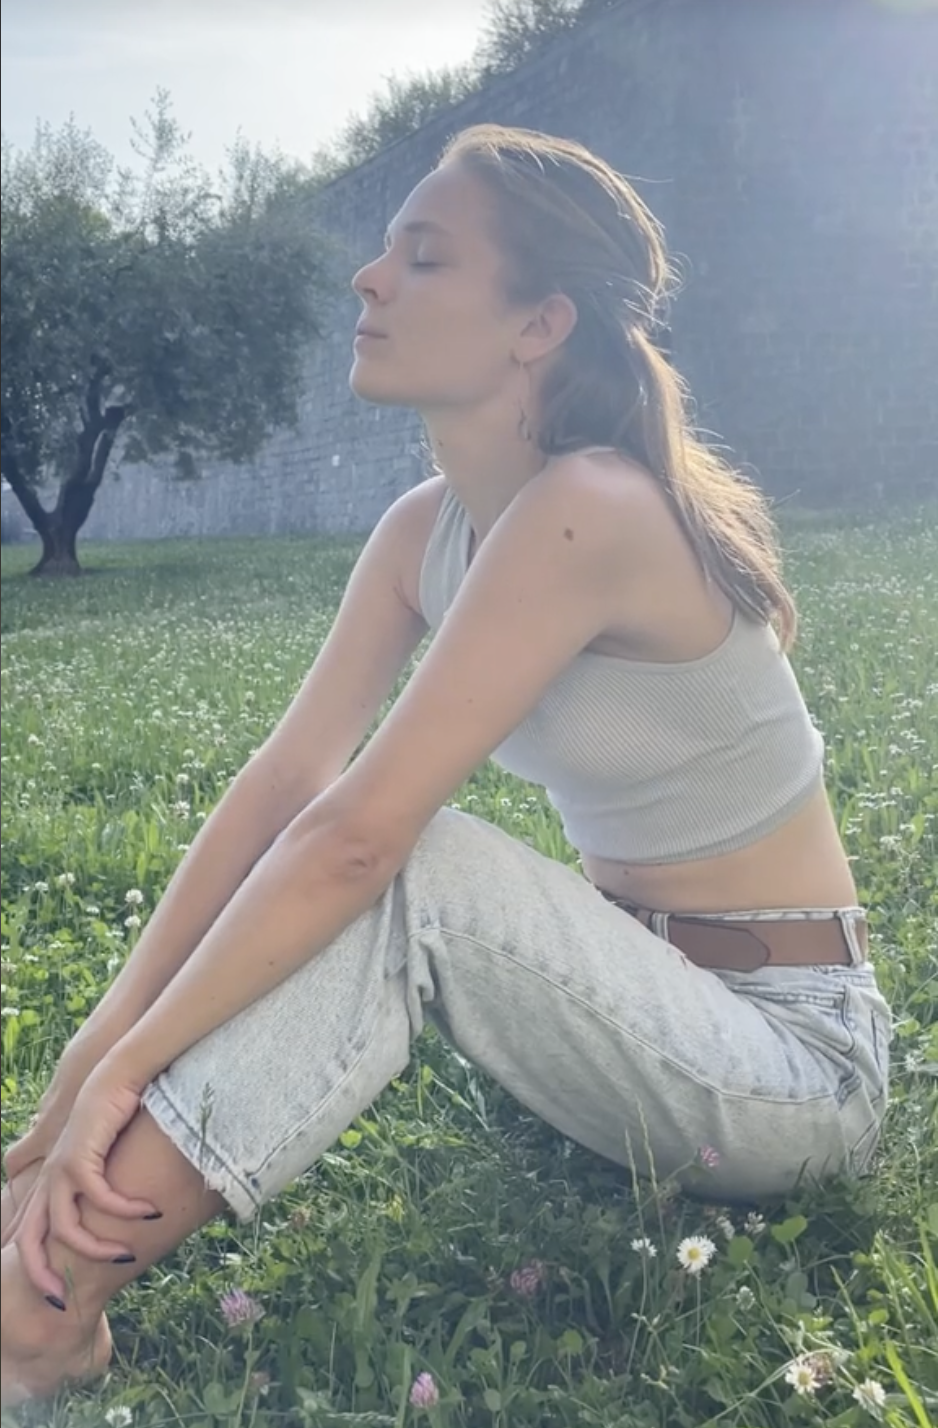 a woman sitting in a grassy area